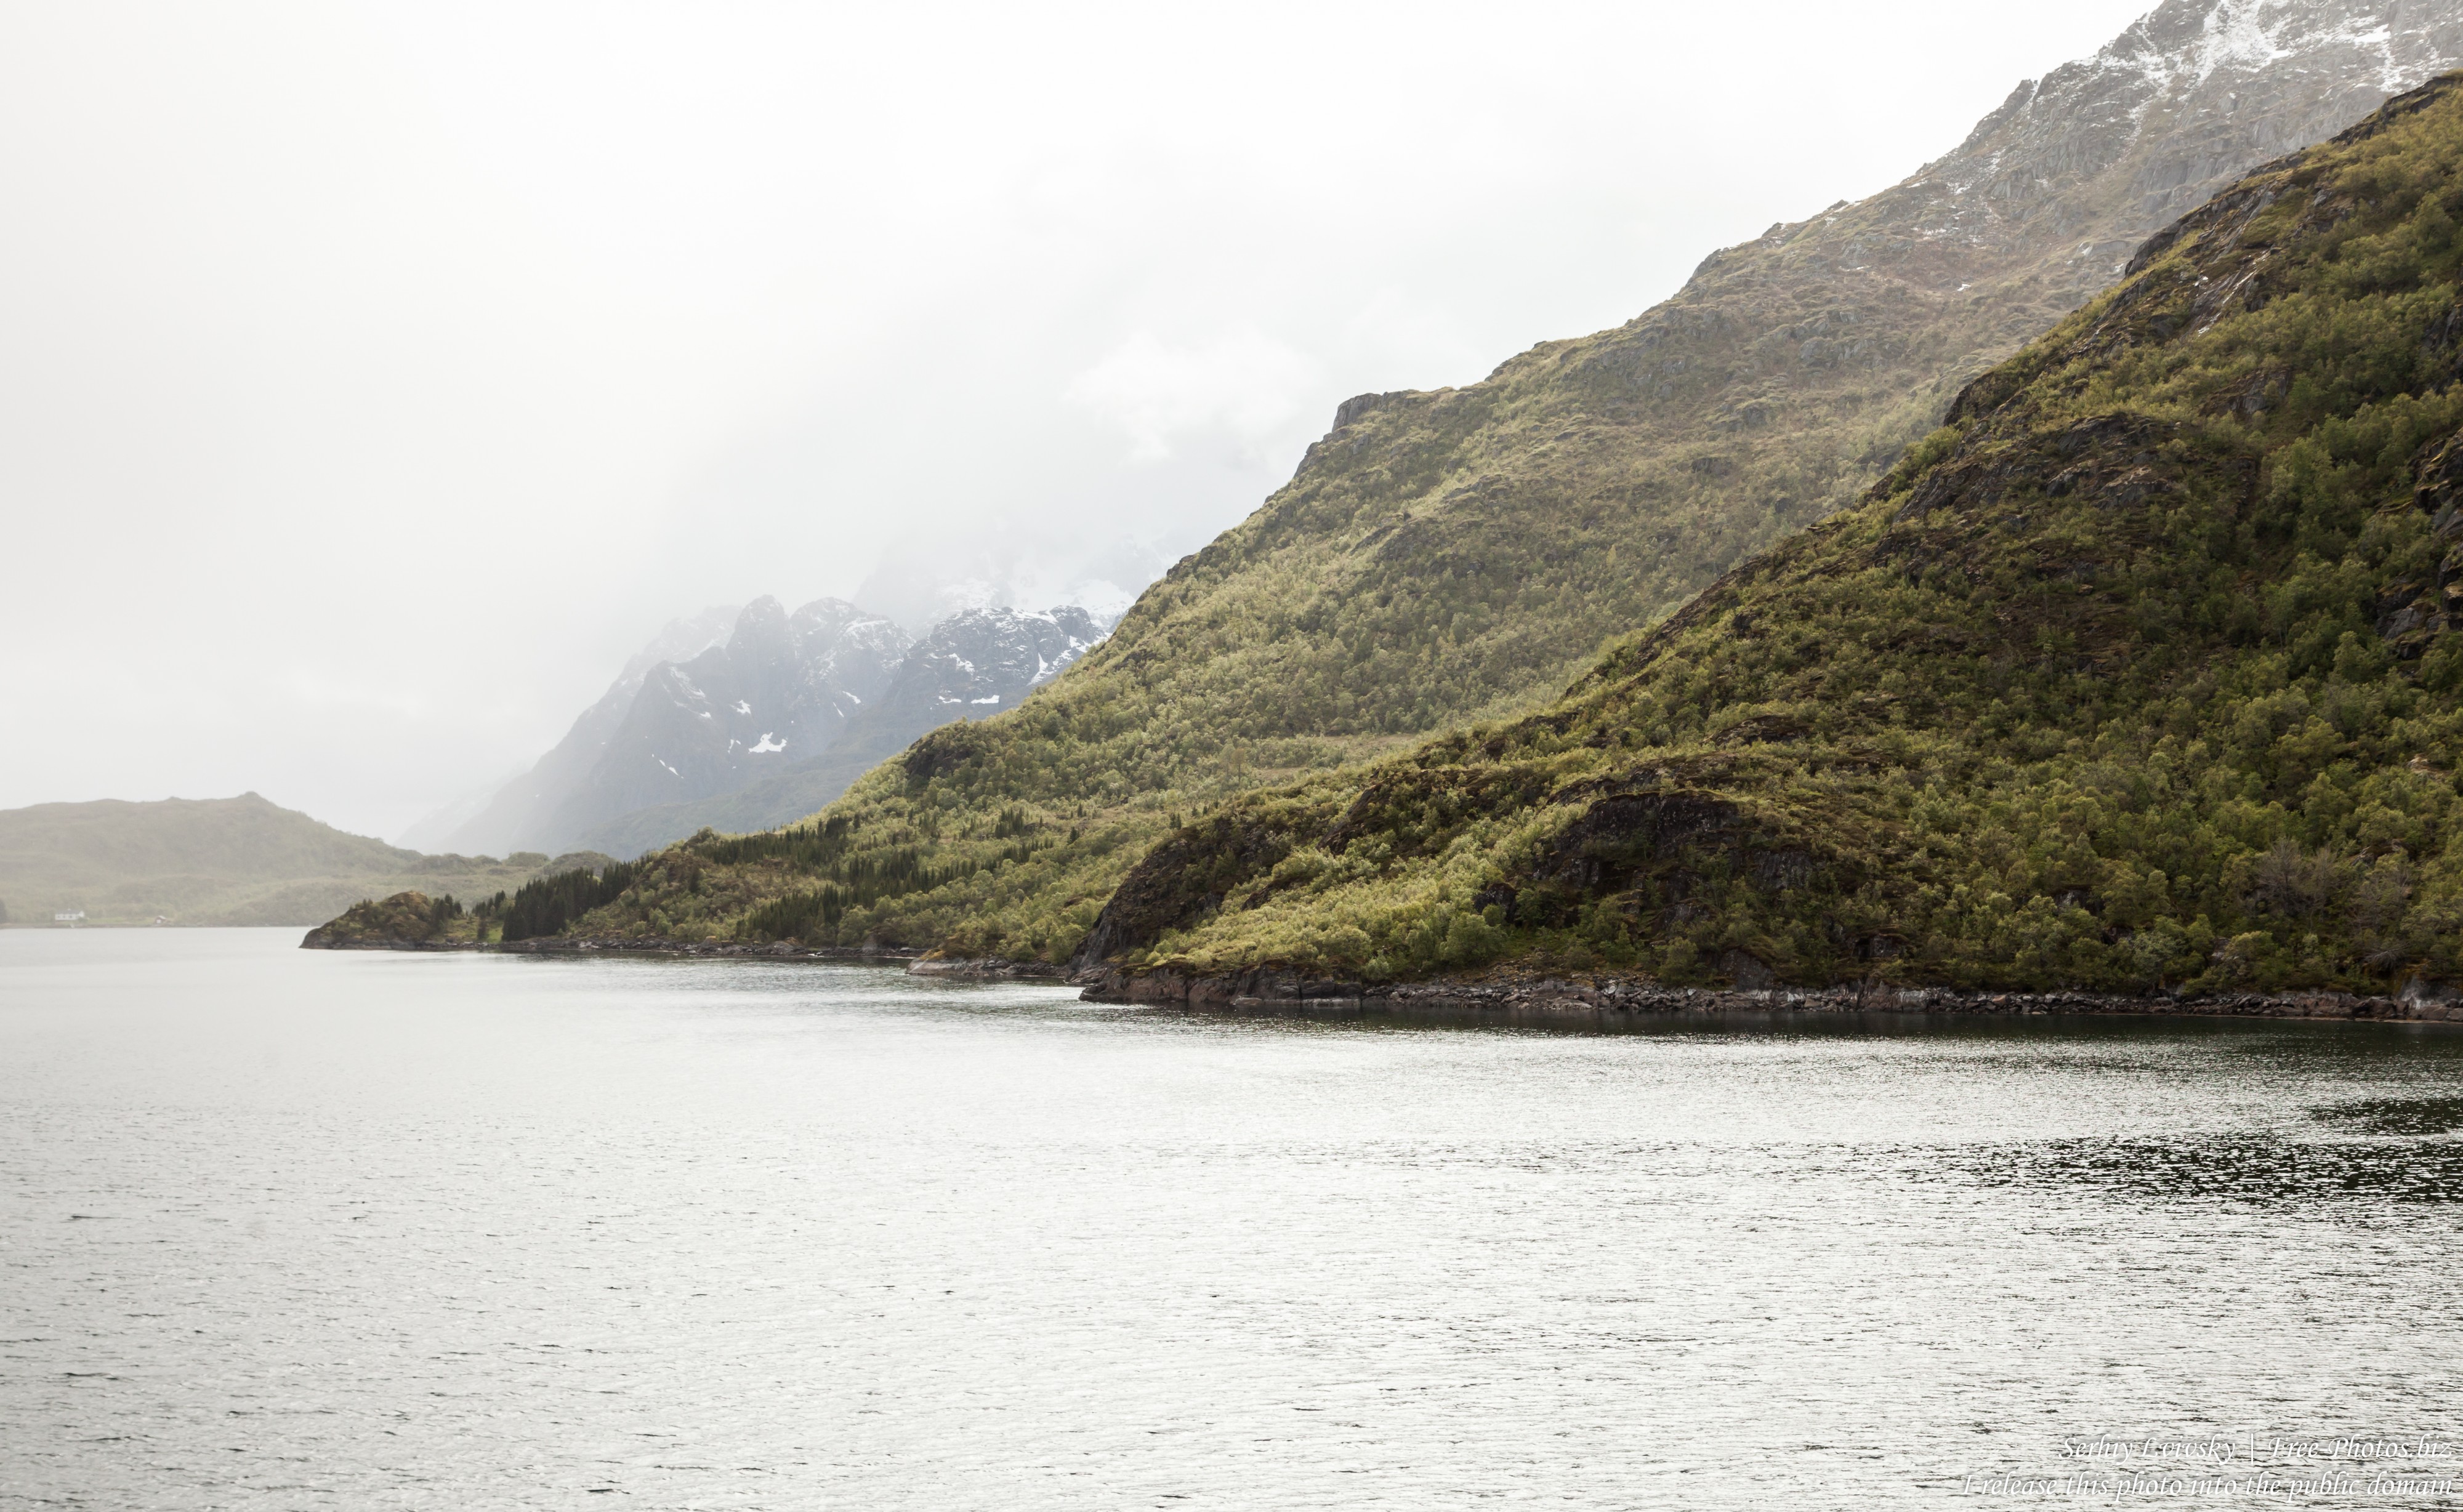 way from Stokmarknes to Trollfjord, Norway, photographed in June 2018 by Serhiy Lvivsky, picture 12